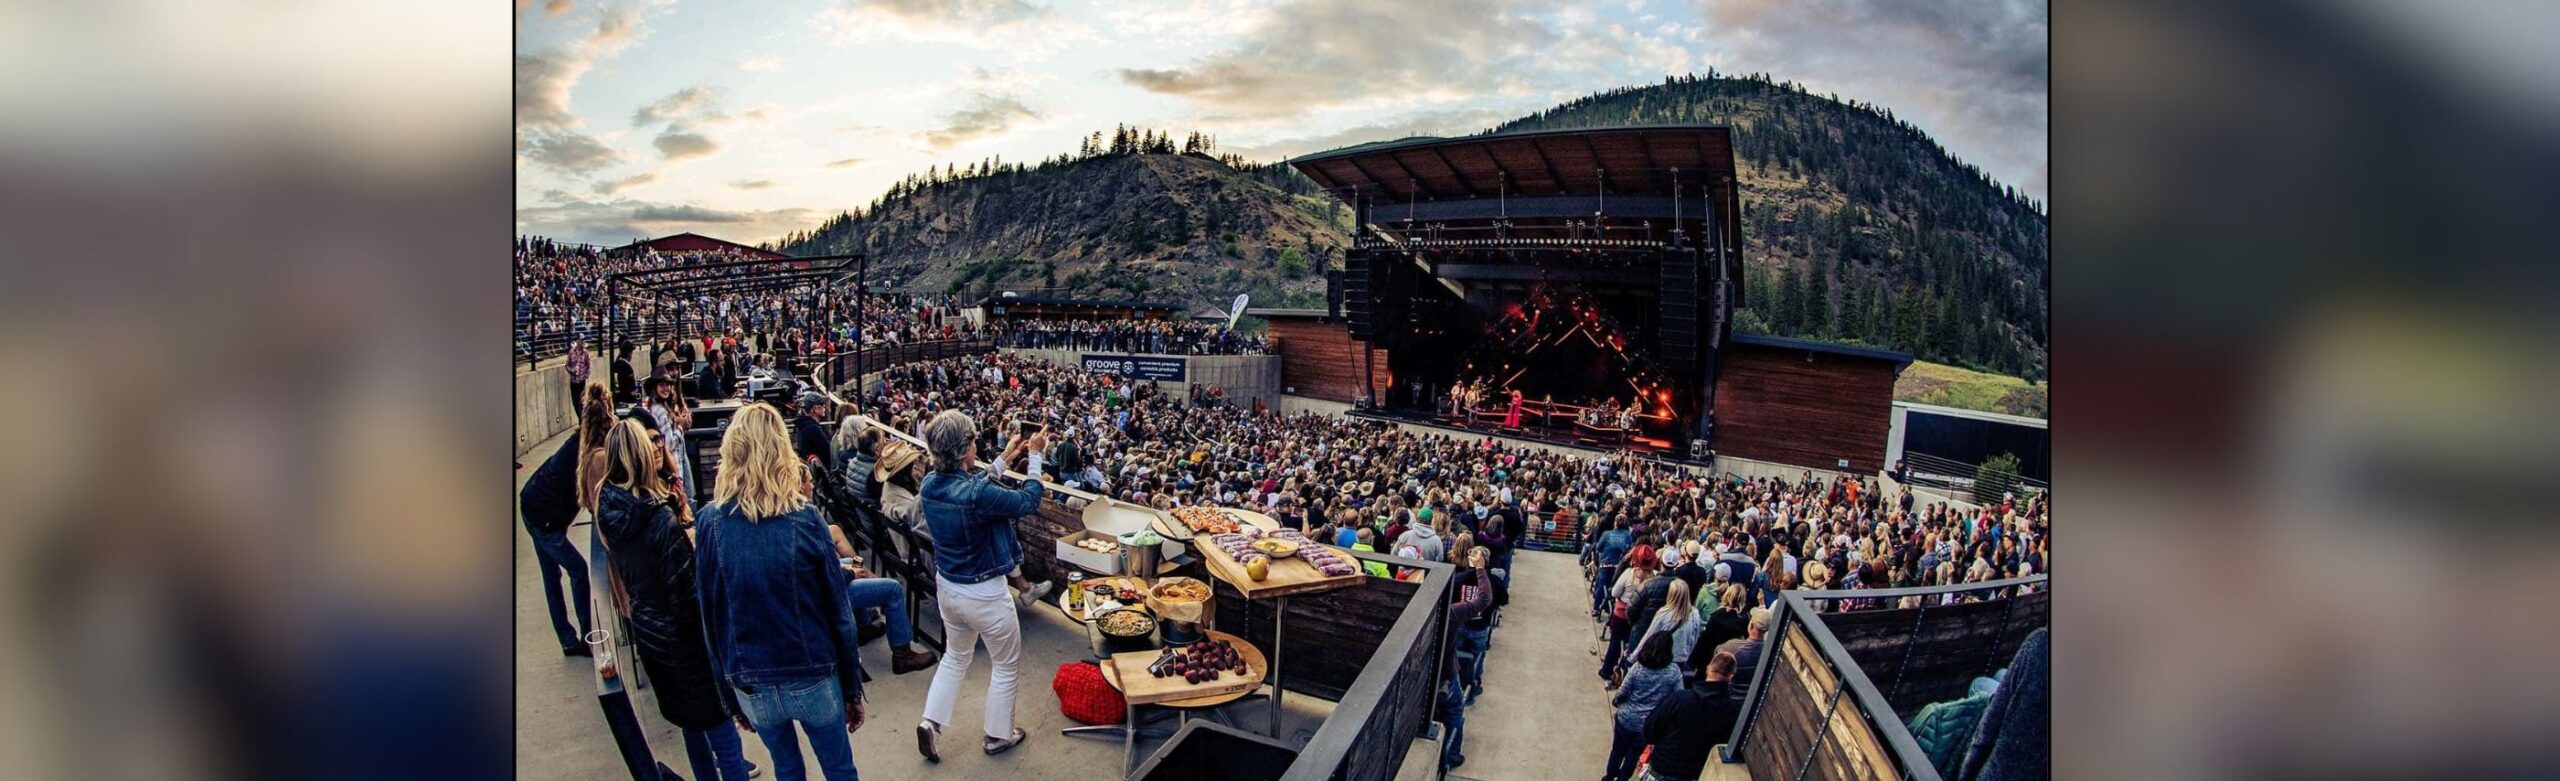 SPECIAL OFFER: Full Premium Box Released for Pixies and Modest Mouse at KettleHouse Amphitheater Image